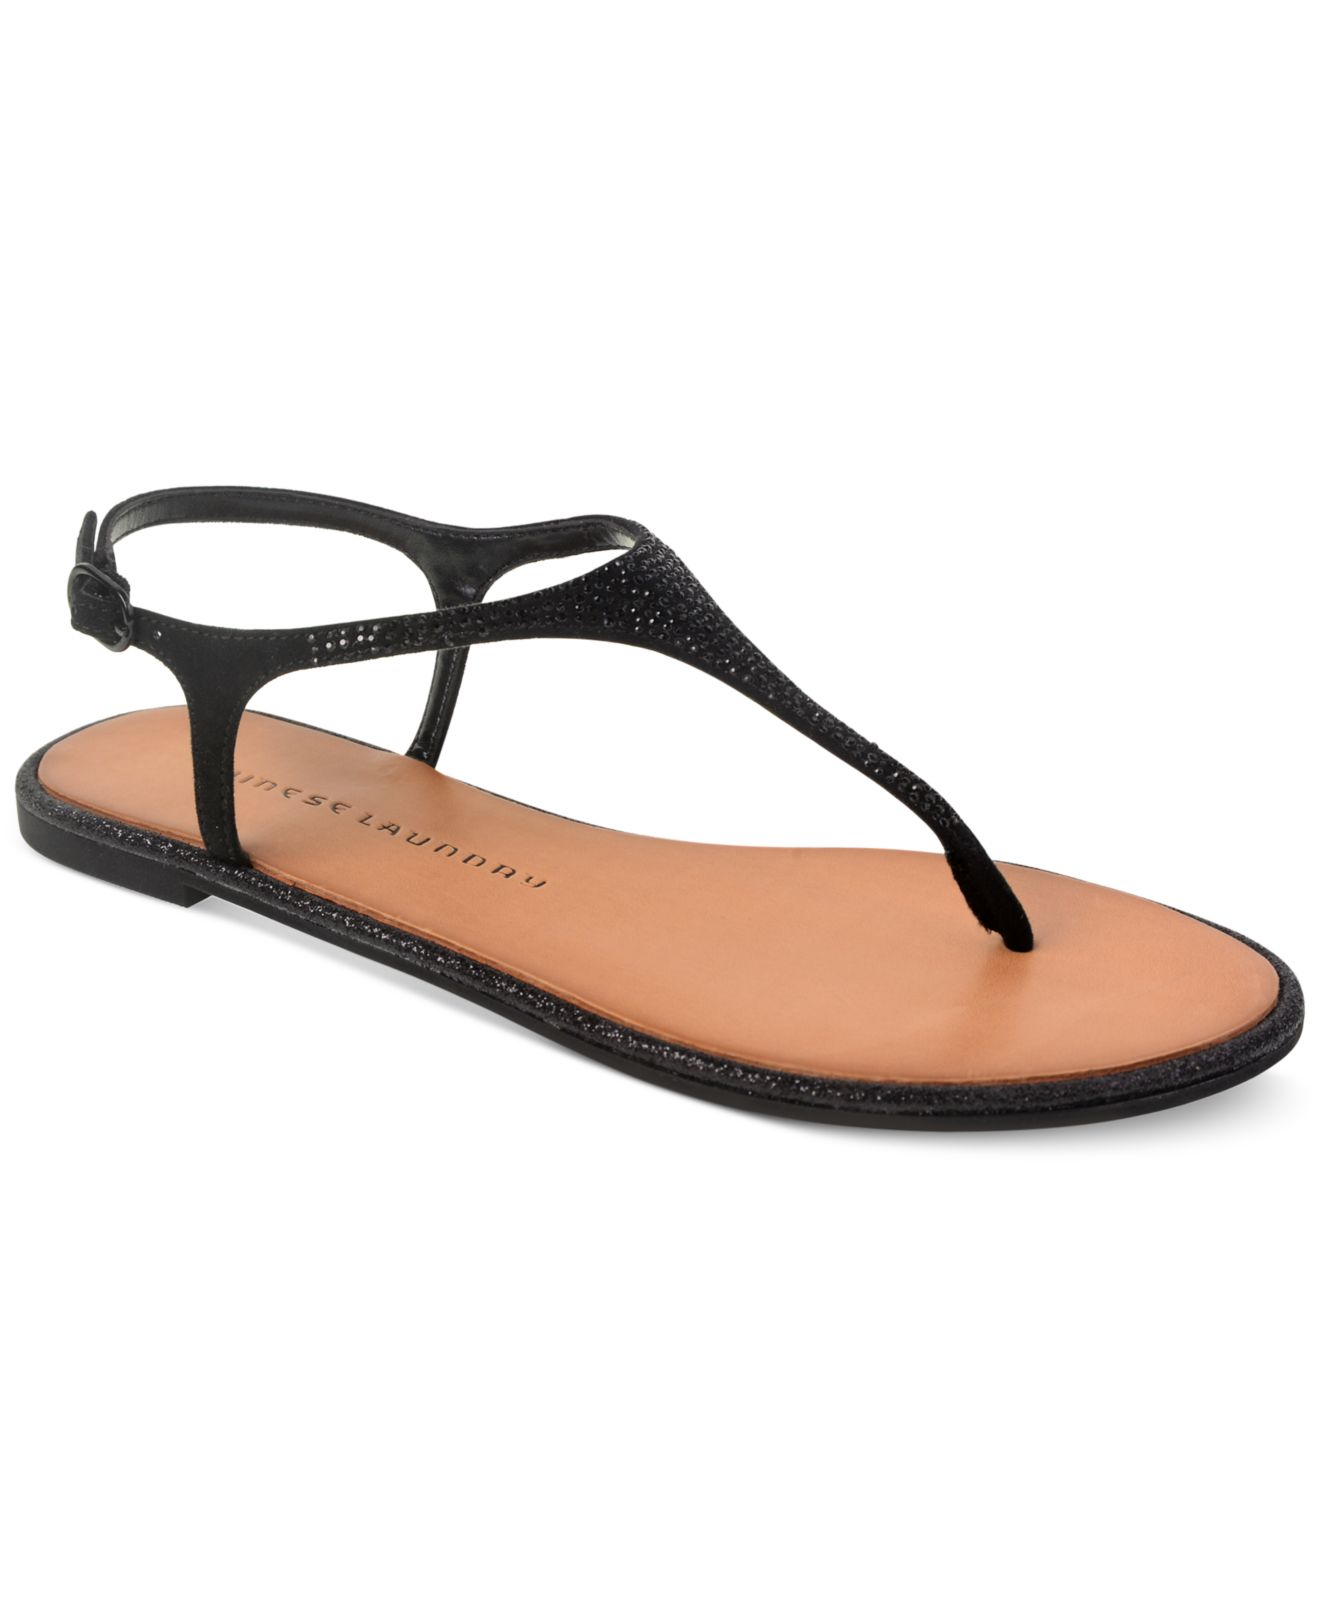 Chinese Laundry Glam Rock Flat Thong Sandals in Black | Lyst